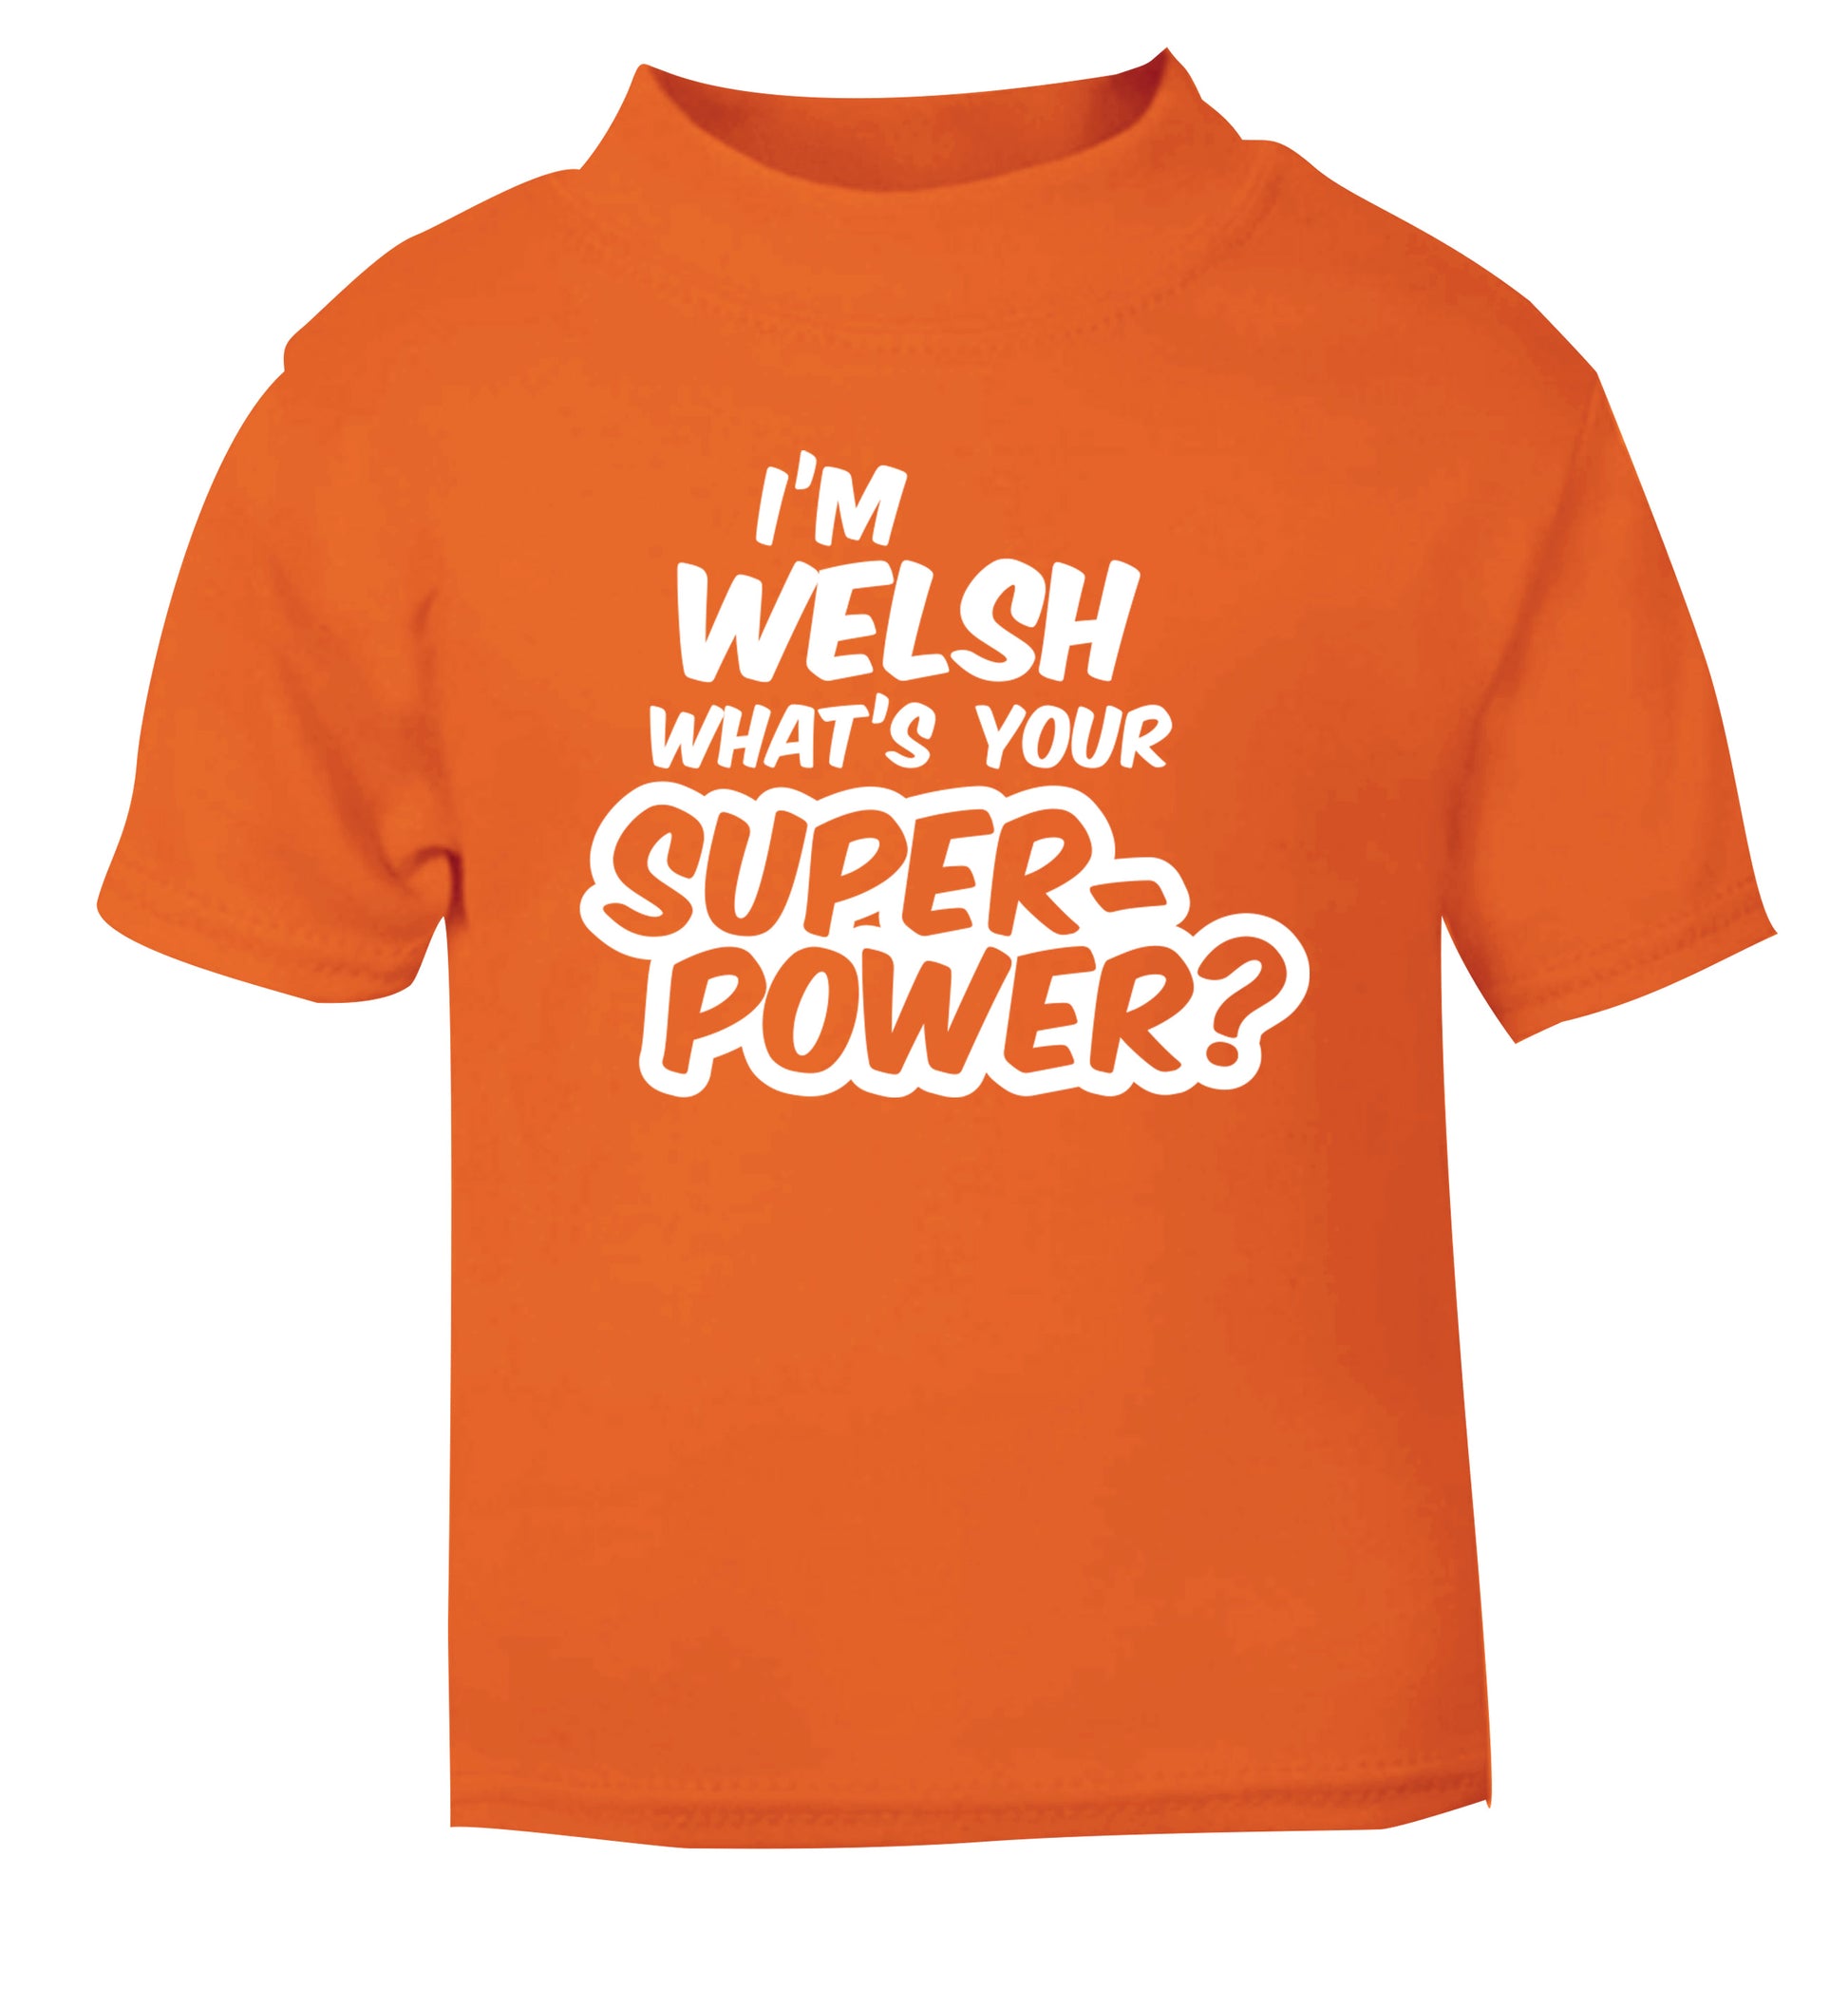 I'm Welsh what's your superpower? orange Baby Toddler Tshirt 2 Years